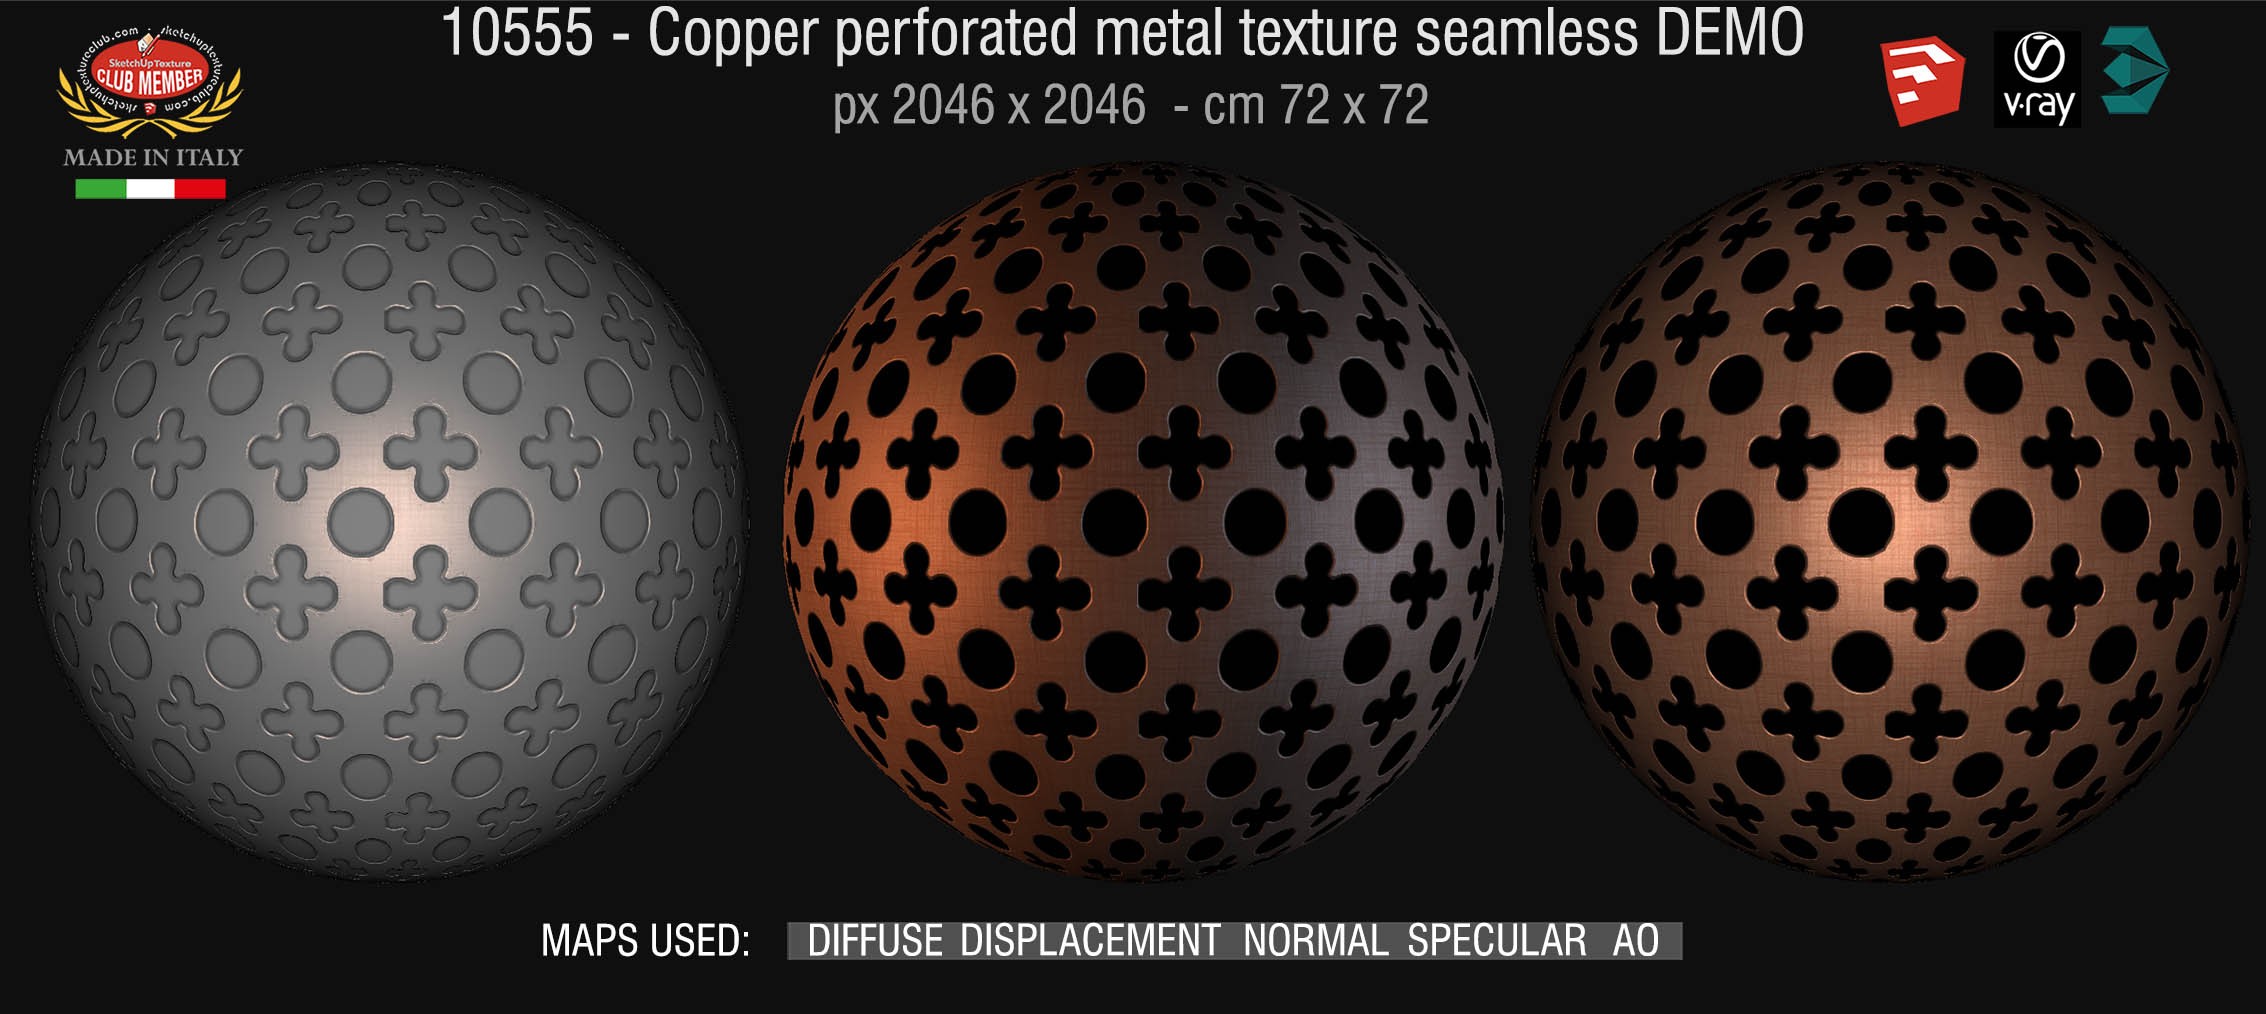 10555 HR Copper perforated metal texture seamless + maps DEMO